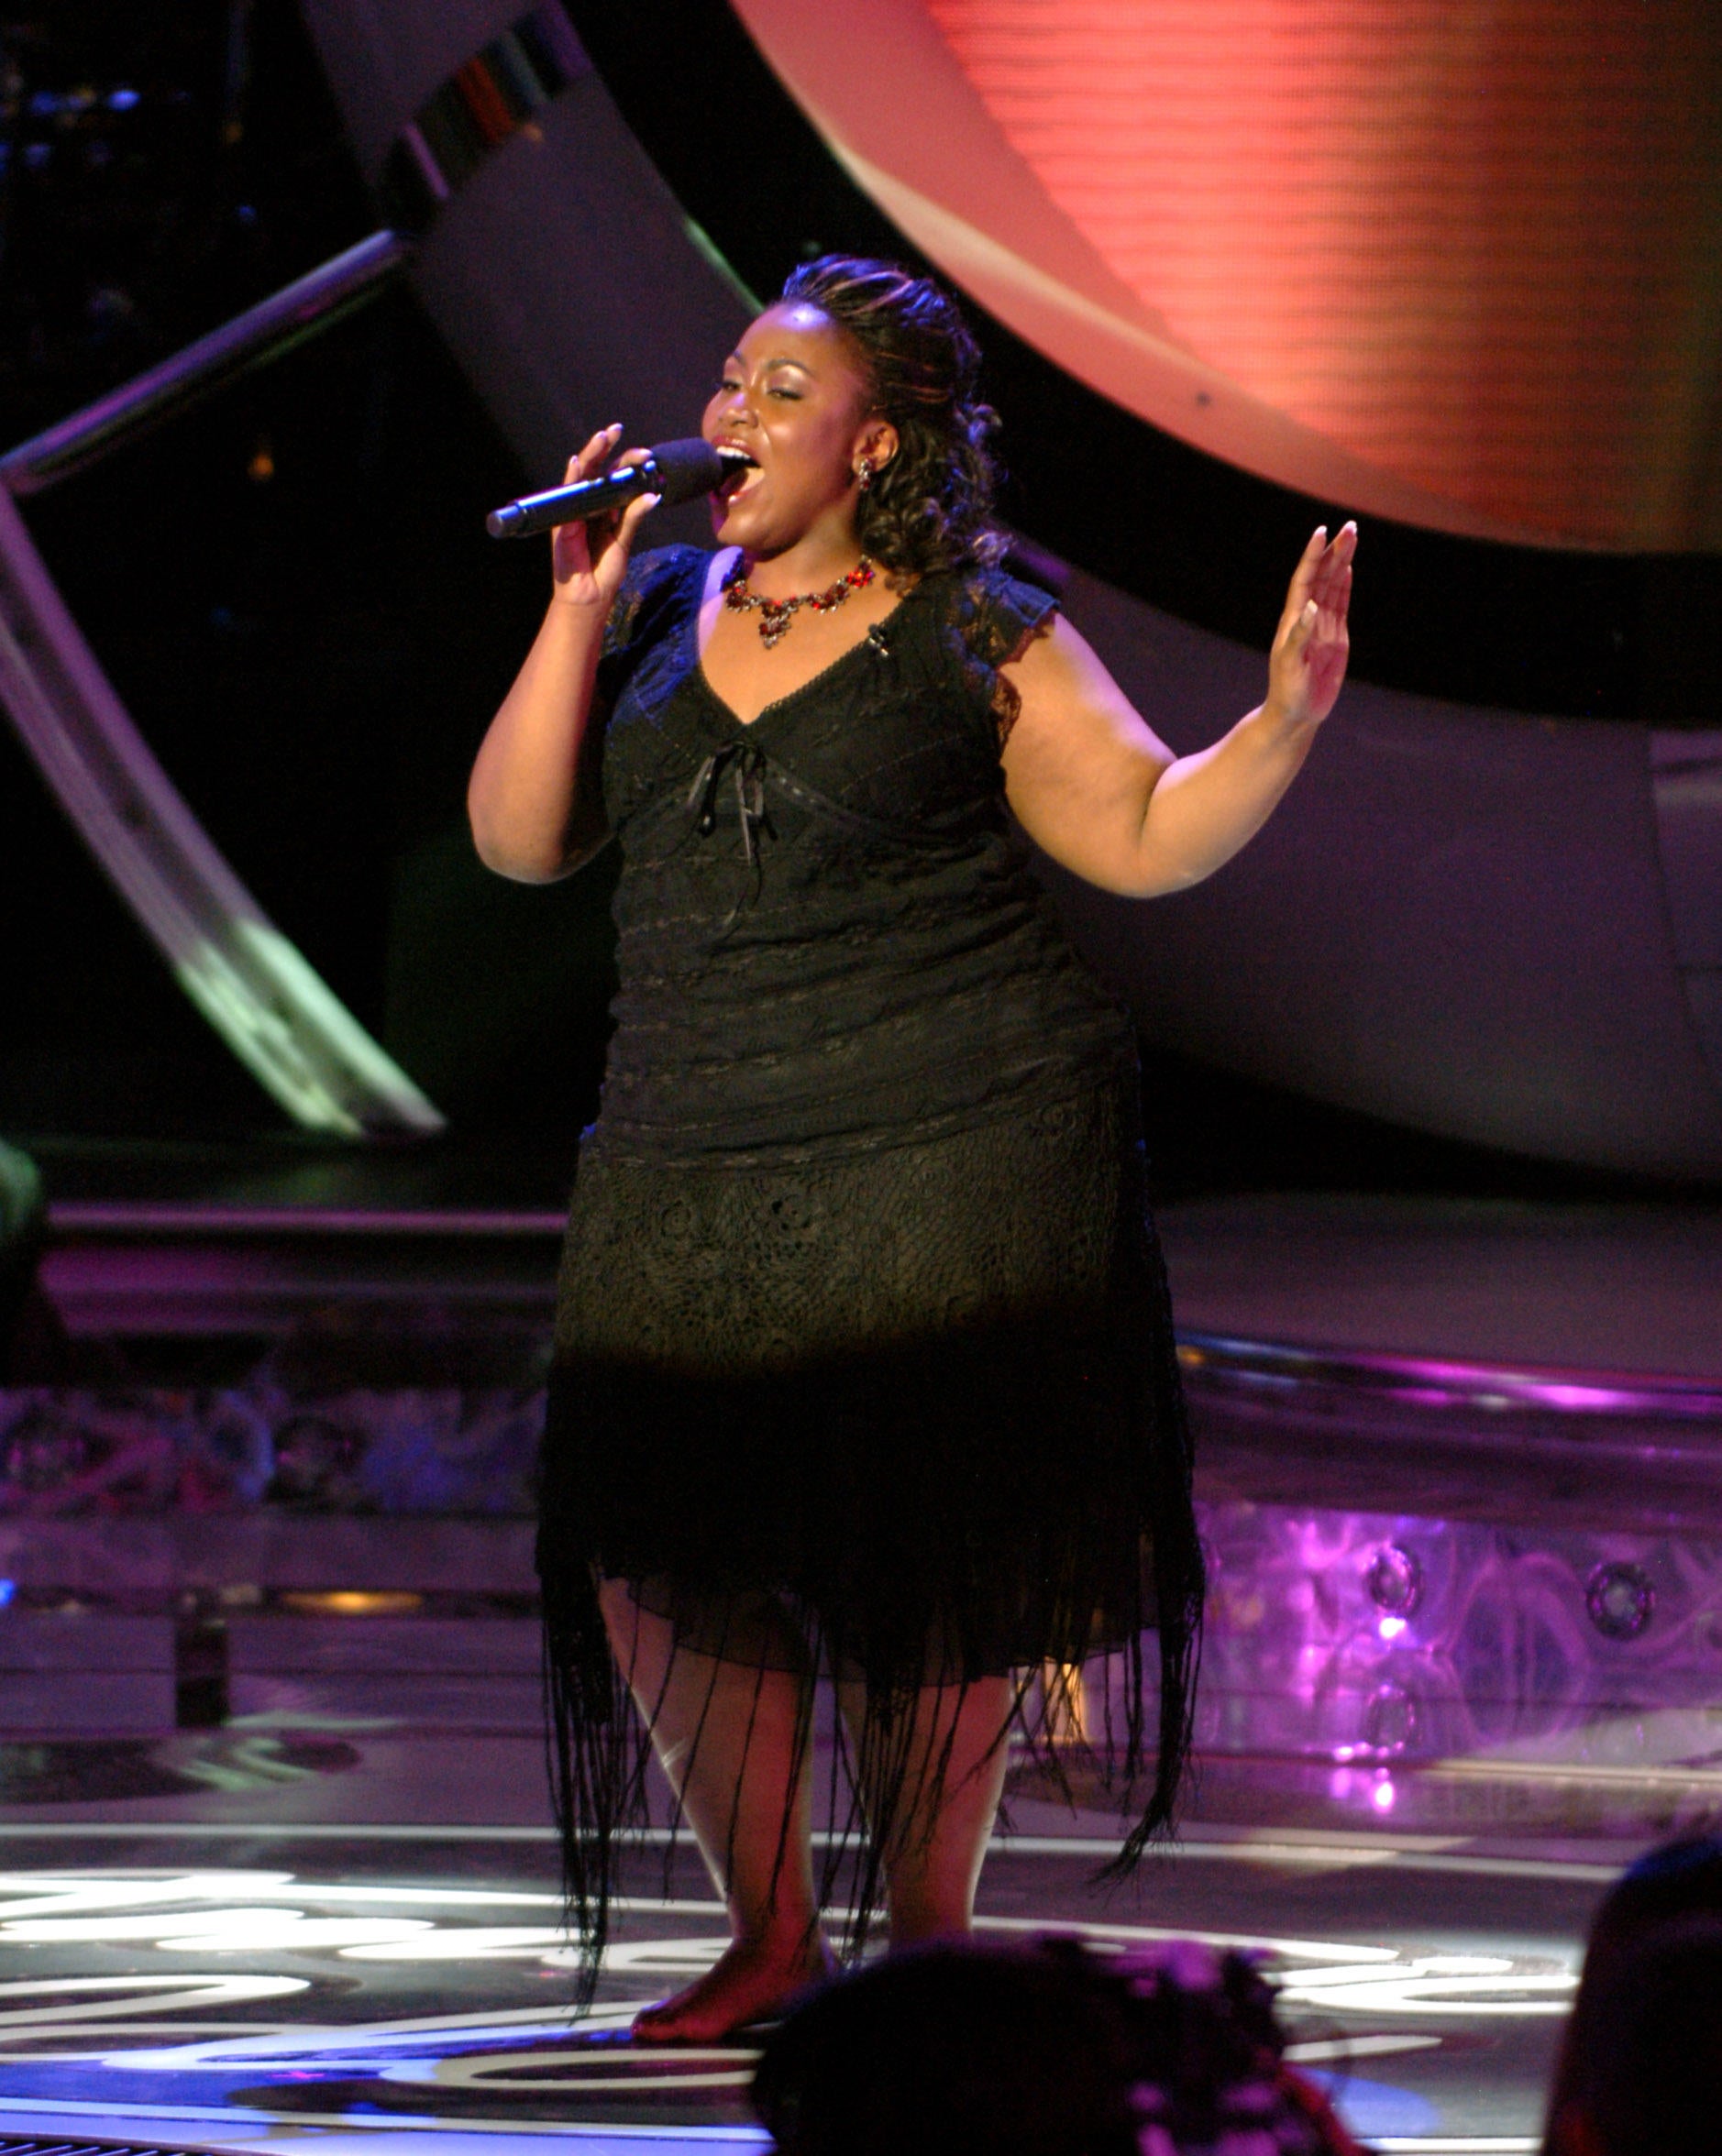 police open investigation into american idol star mandisa’s death aged 47